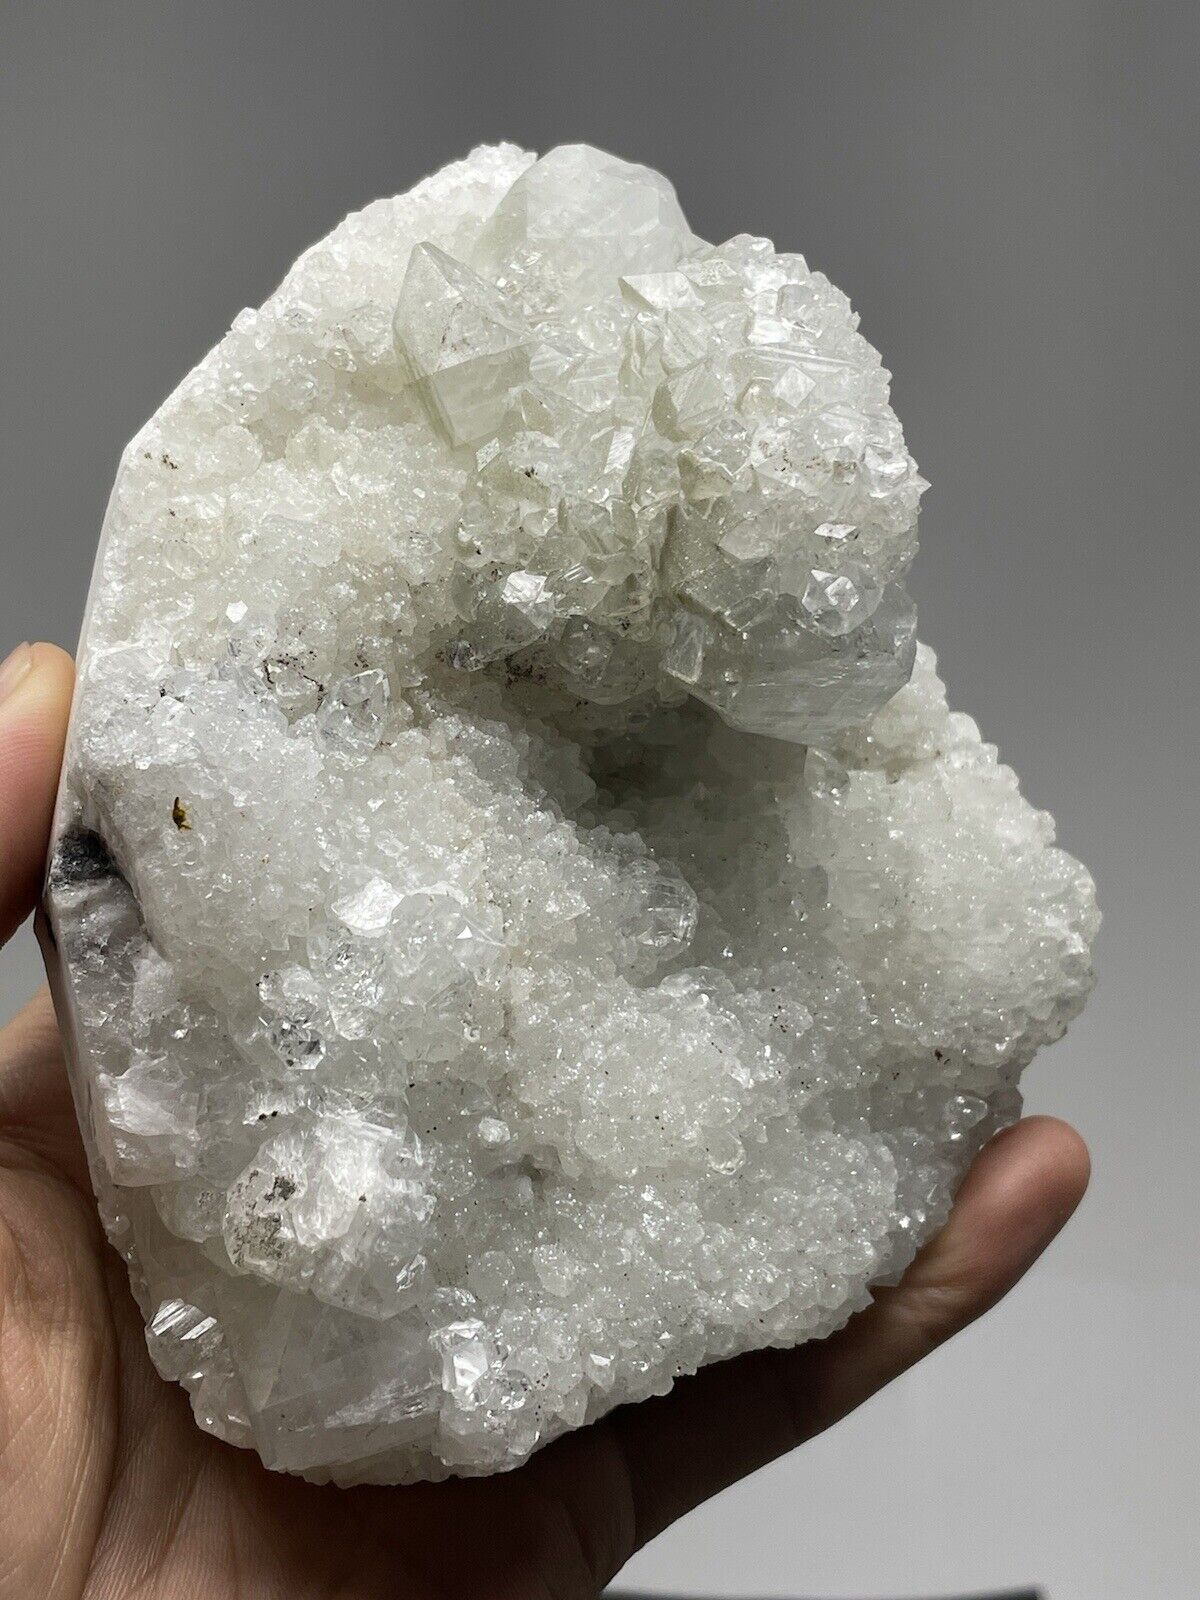 1LBS 5.2oz Zeolite Cluster Clear Apophyllite India Ships From USA A1